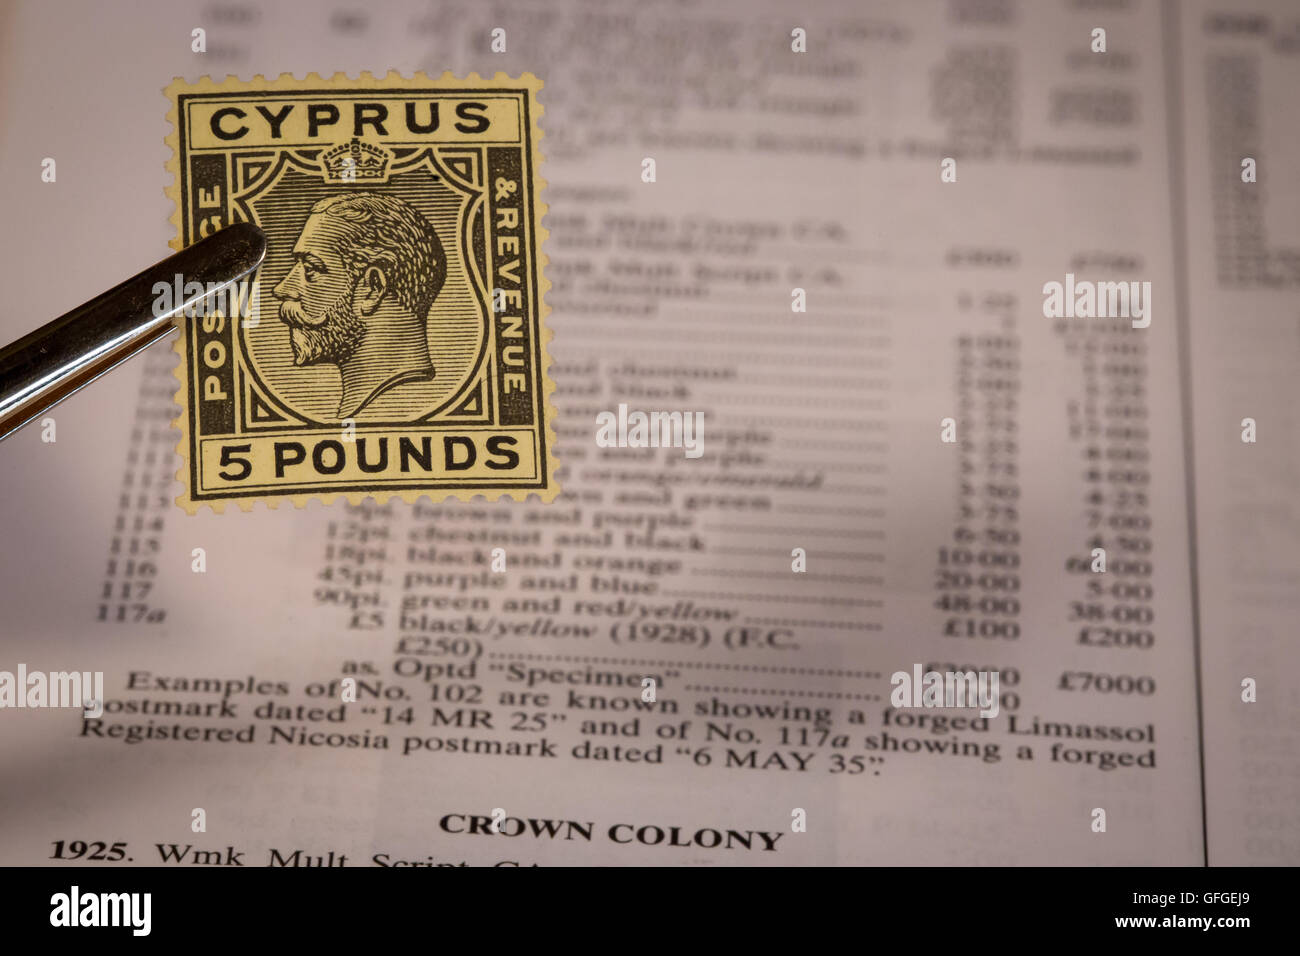 Stamp collecting as a pastime with rare and expensive stamps and High catalogue values like Cyprus 5 pounds Stock Photo